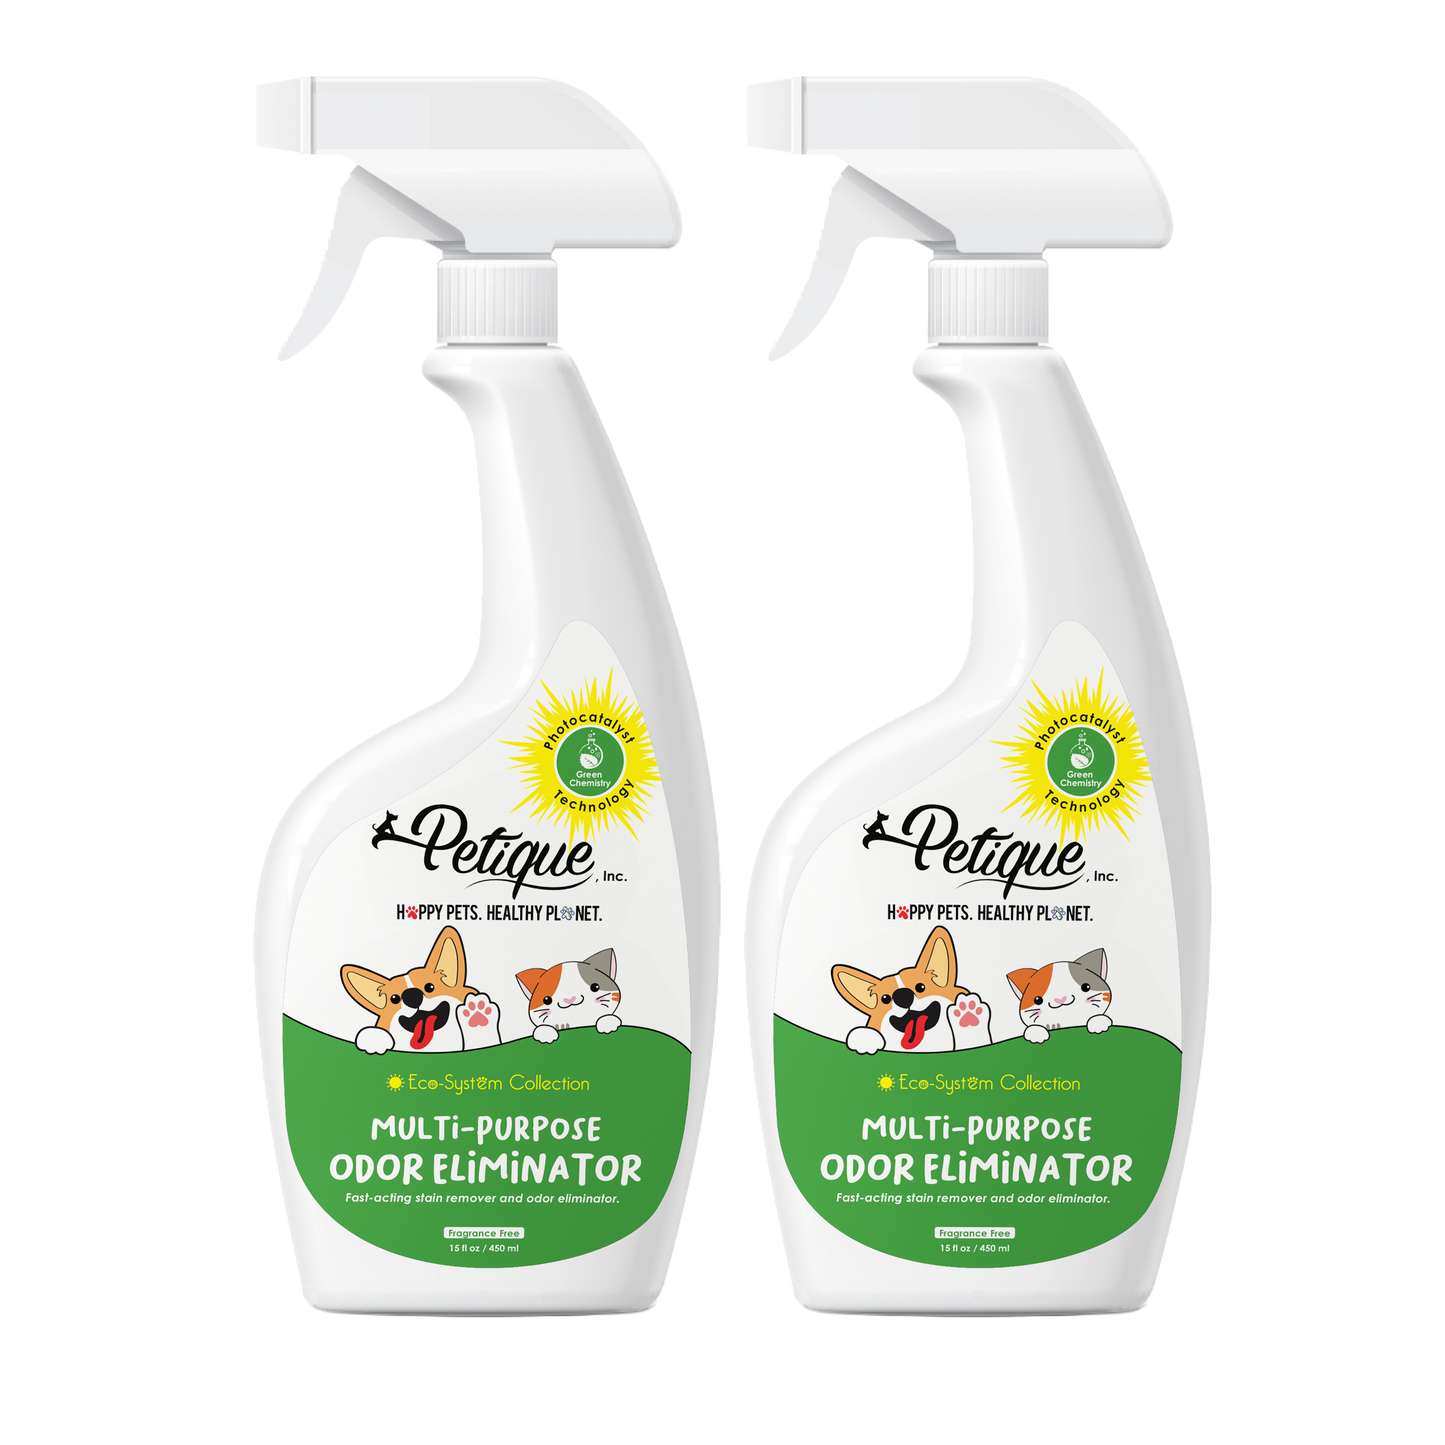 eliminate odors and stains with the multi-purpose odor eliminator